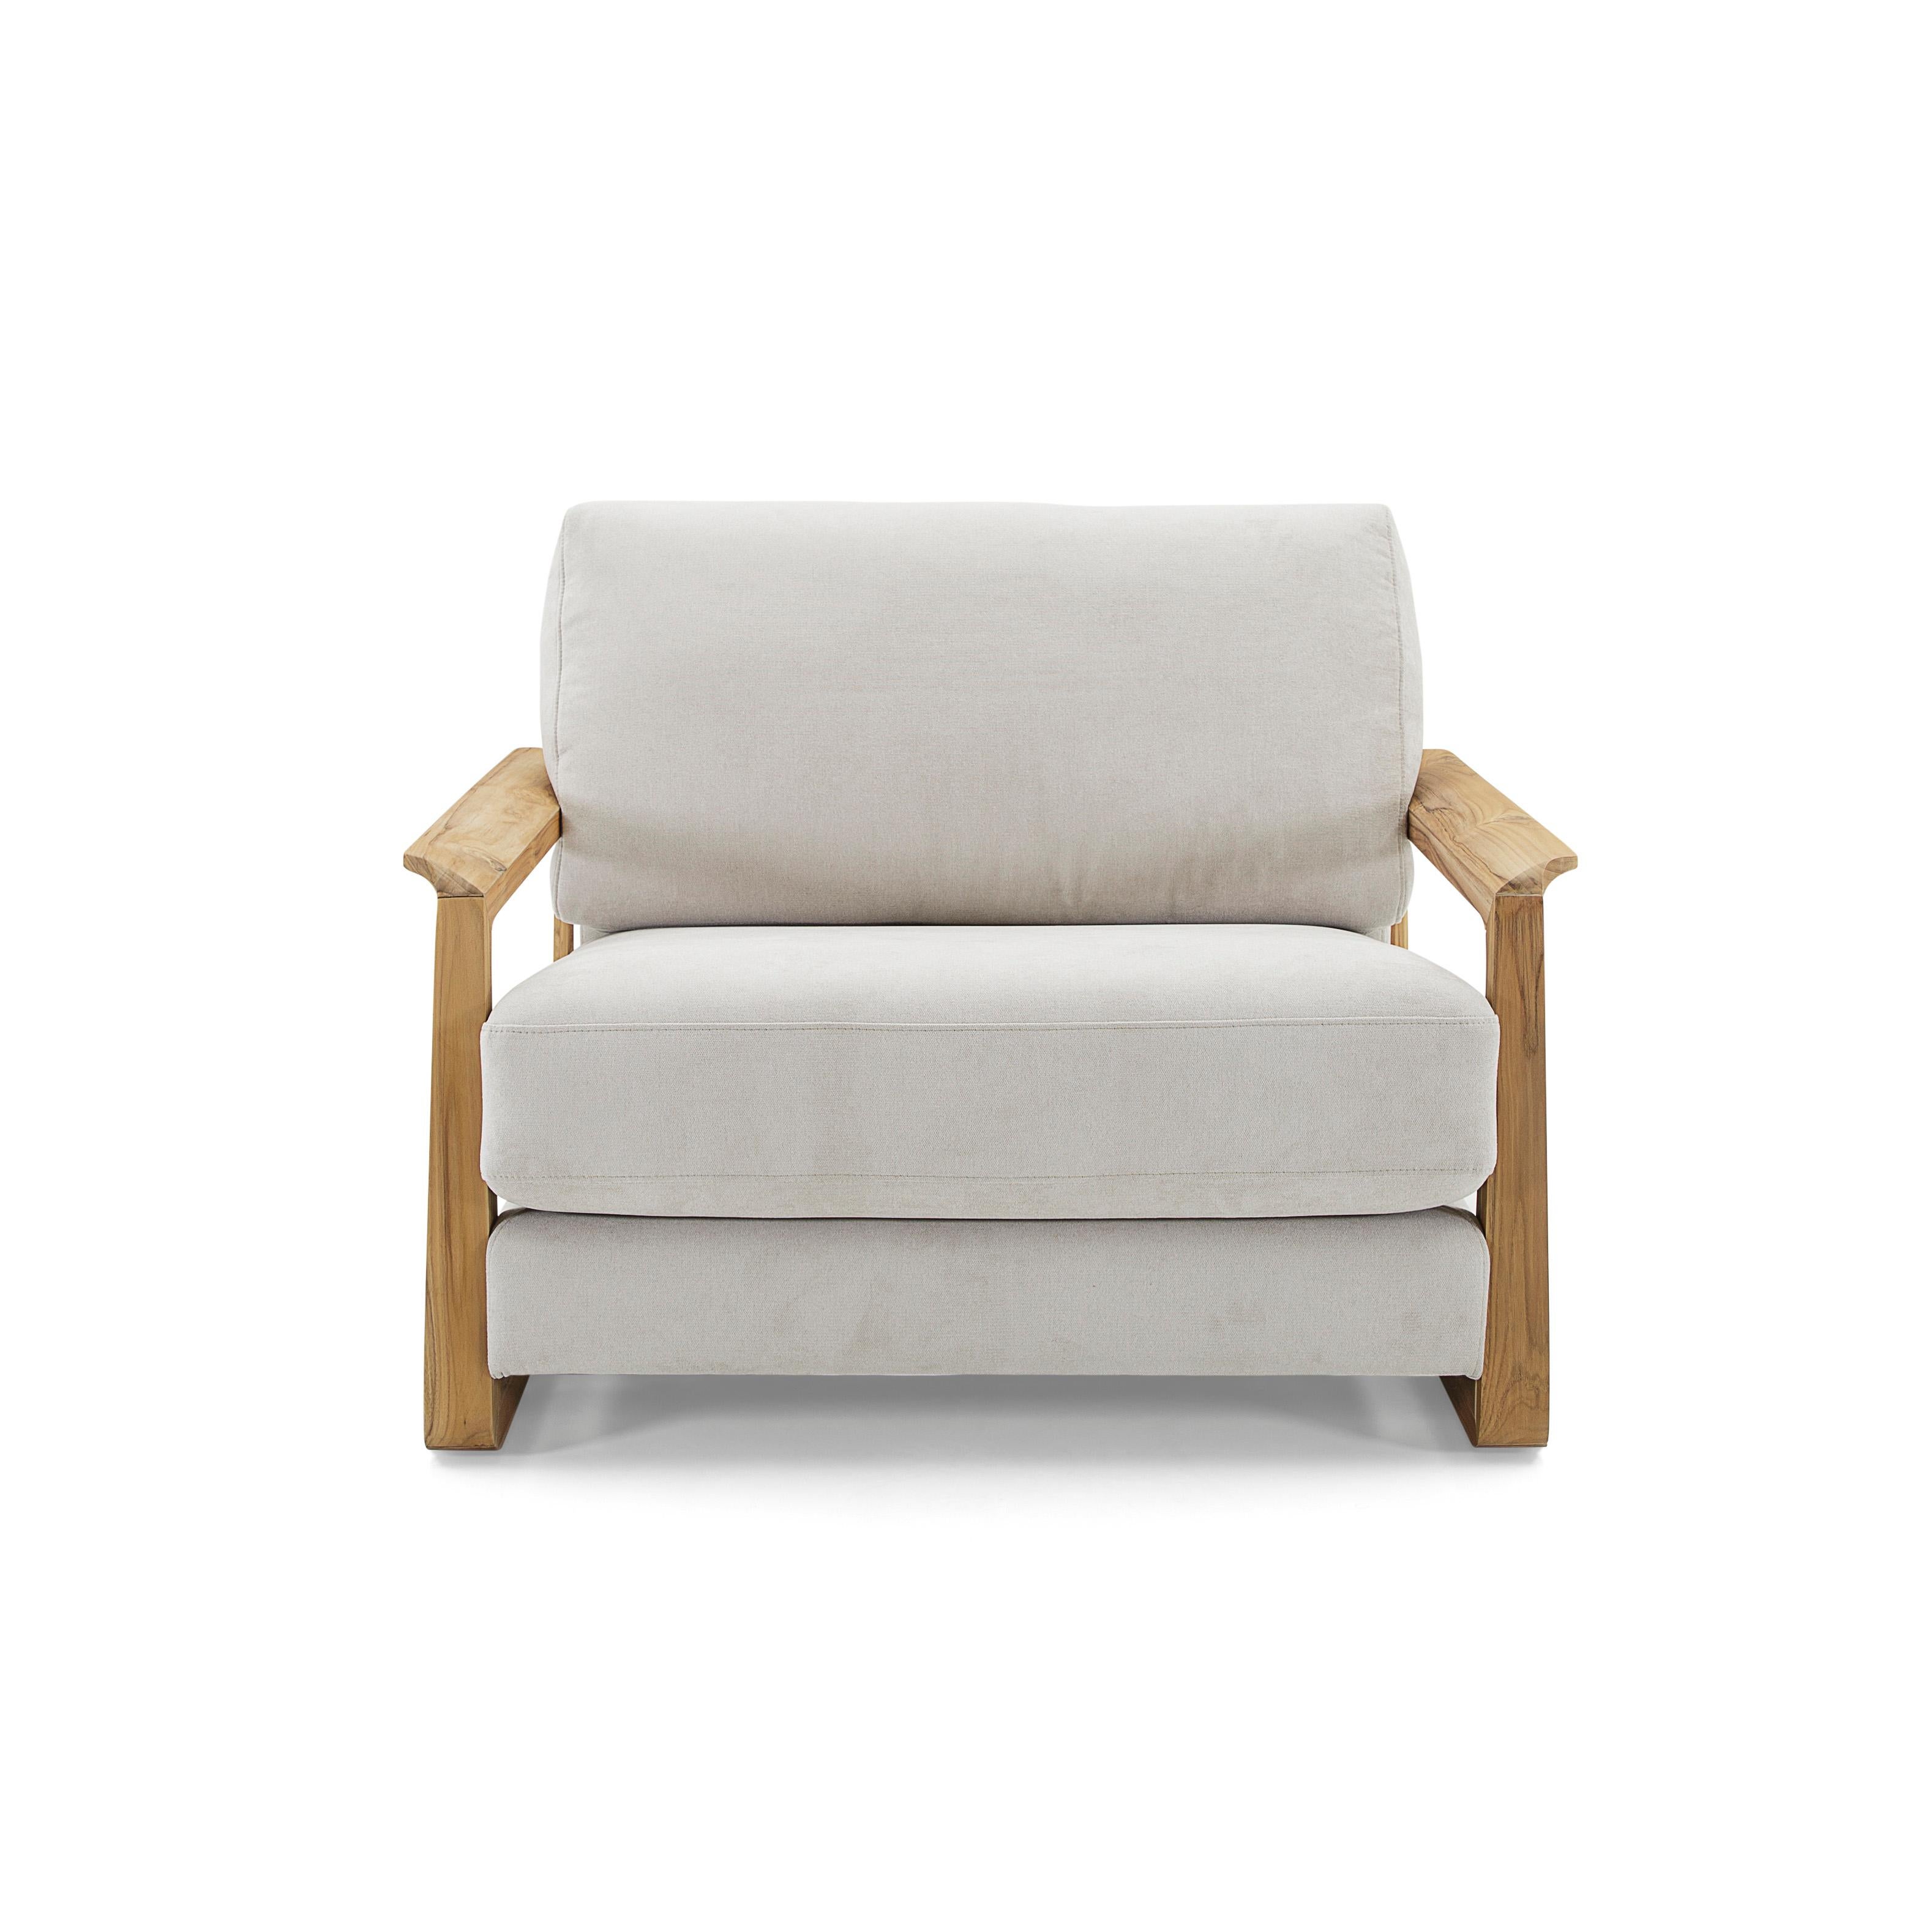 The Fine contemporary armchair upholstered in a stunning oatmeal fabric and its arms in a teak wood finish, is the perfect combination for your living room. As relaxing as it looks, the actual seat is even better. This armchair is the perfect